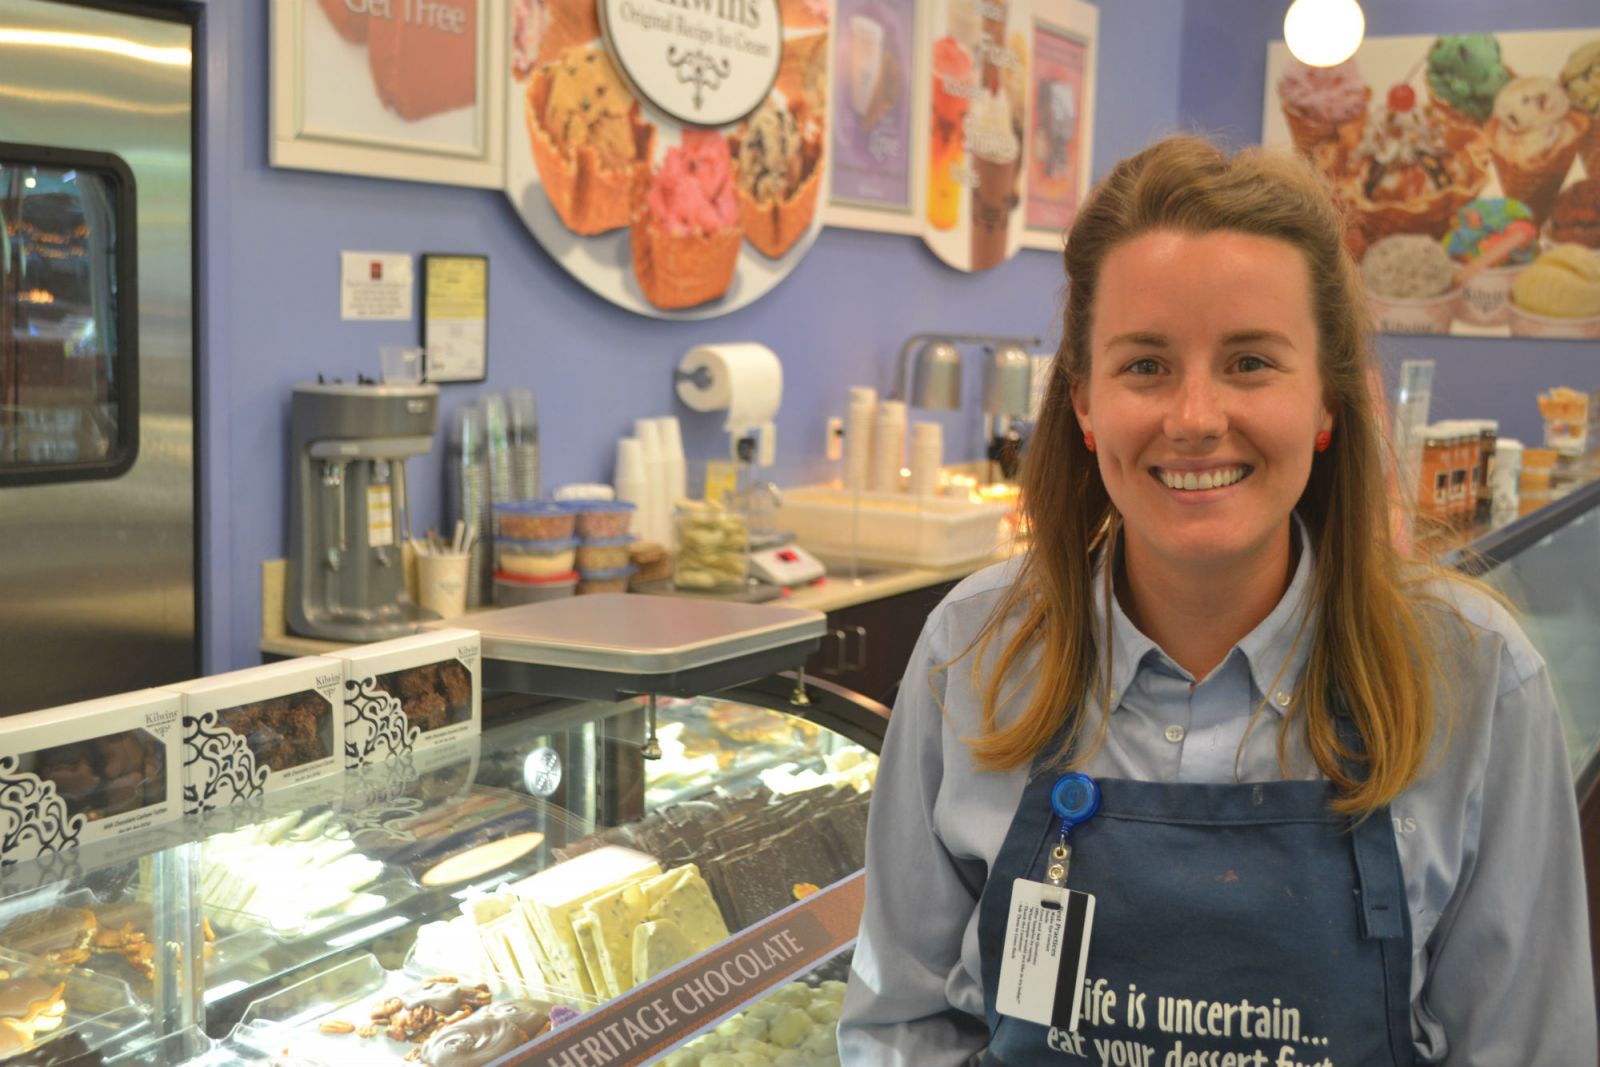 Ashley Clark, co-owner of Kilwins Chocolates, Fudge and Ice Cream at NOMA Square in Greenville, was named the 2018 South Carolina Young Entrepreneur of the Year. (Photo/Teresa Cutlip)